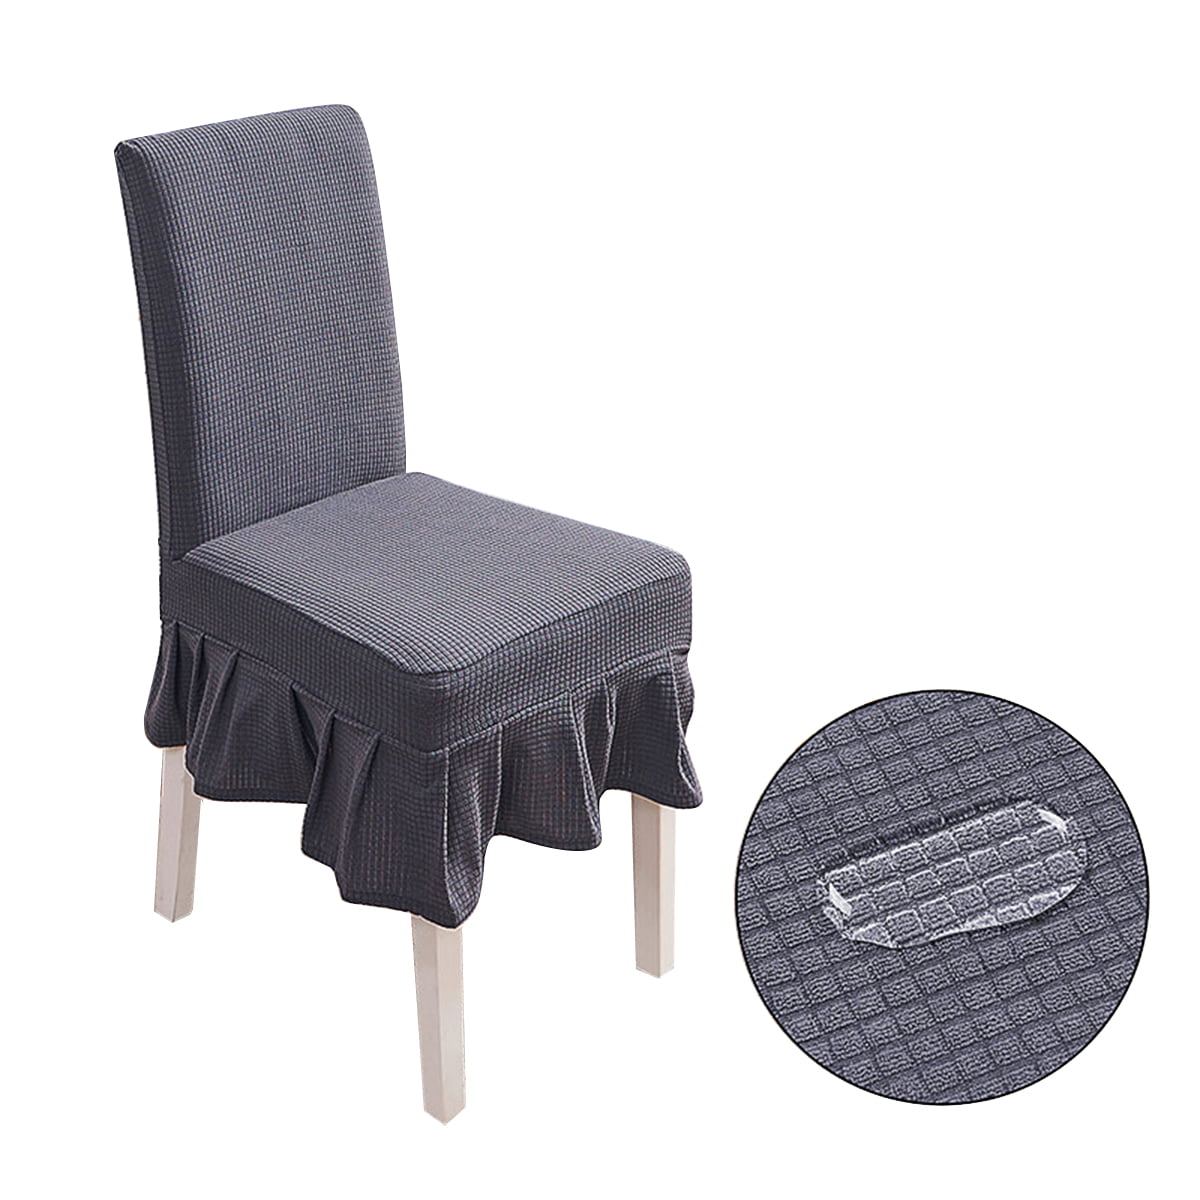 Details about   Solid Color Slipcovers Short Back Chair Cover Washable for Banquet Hotel 